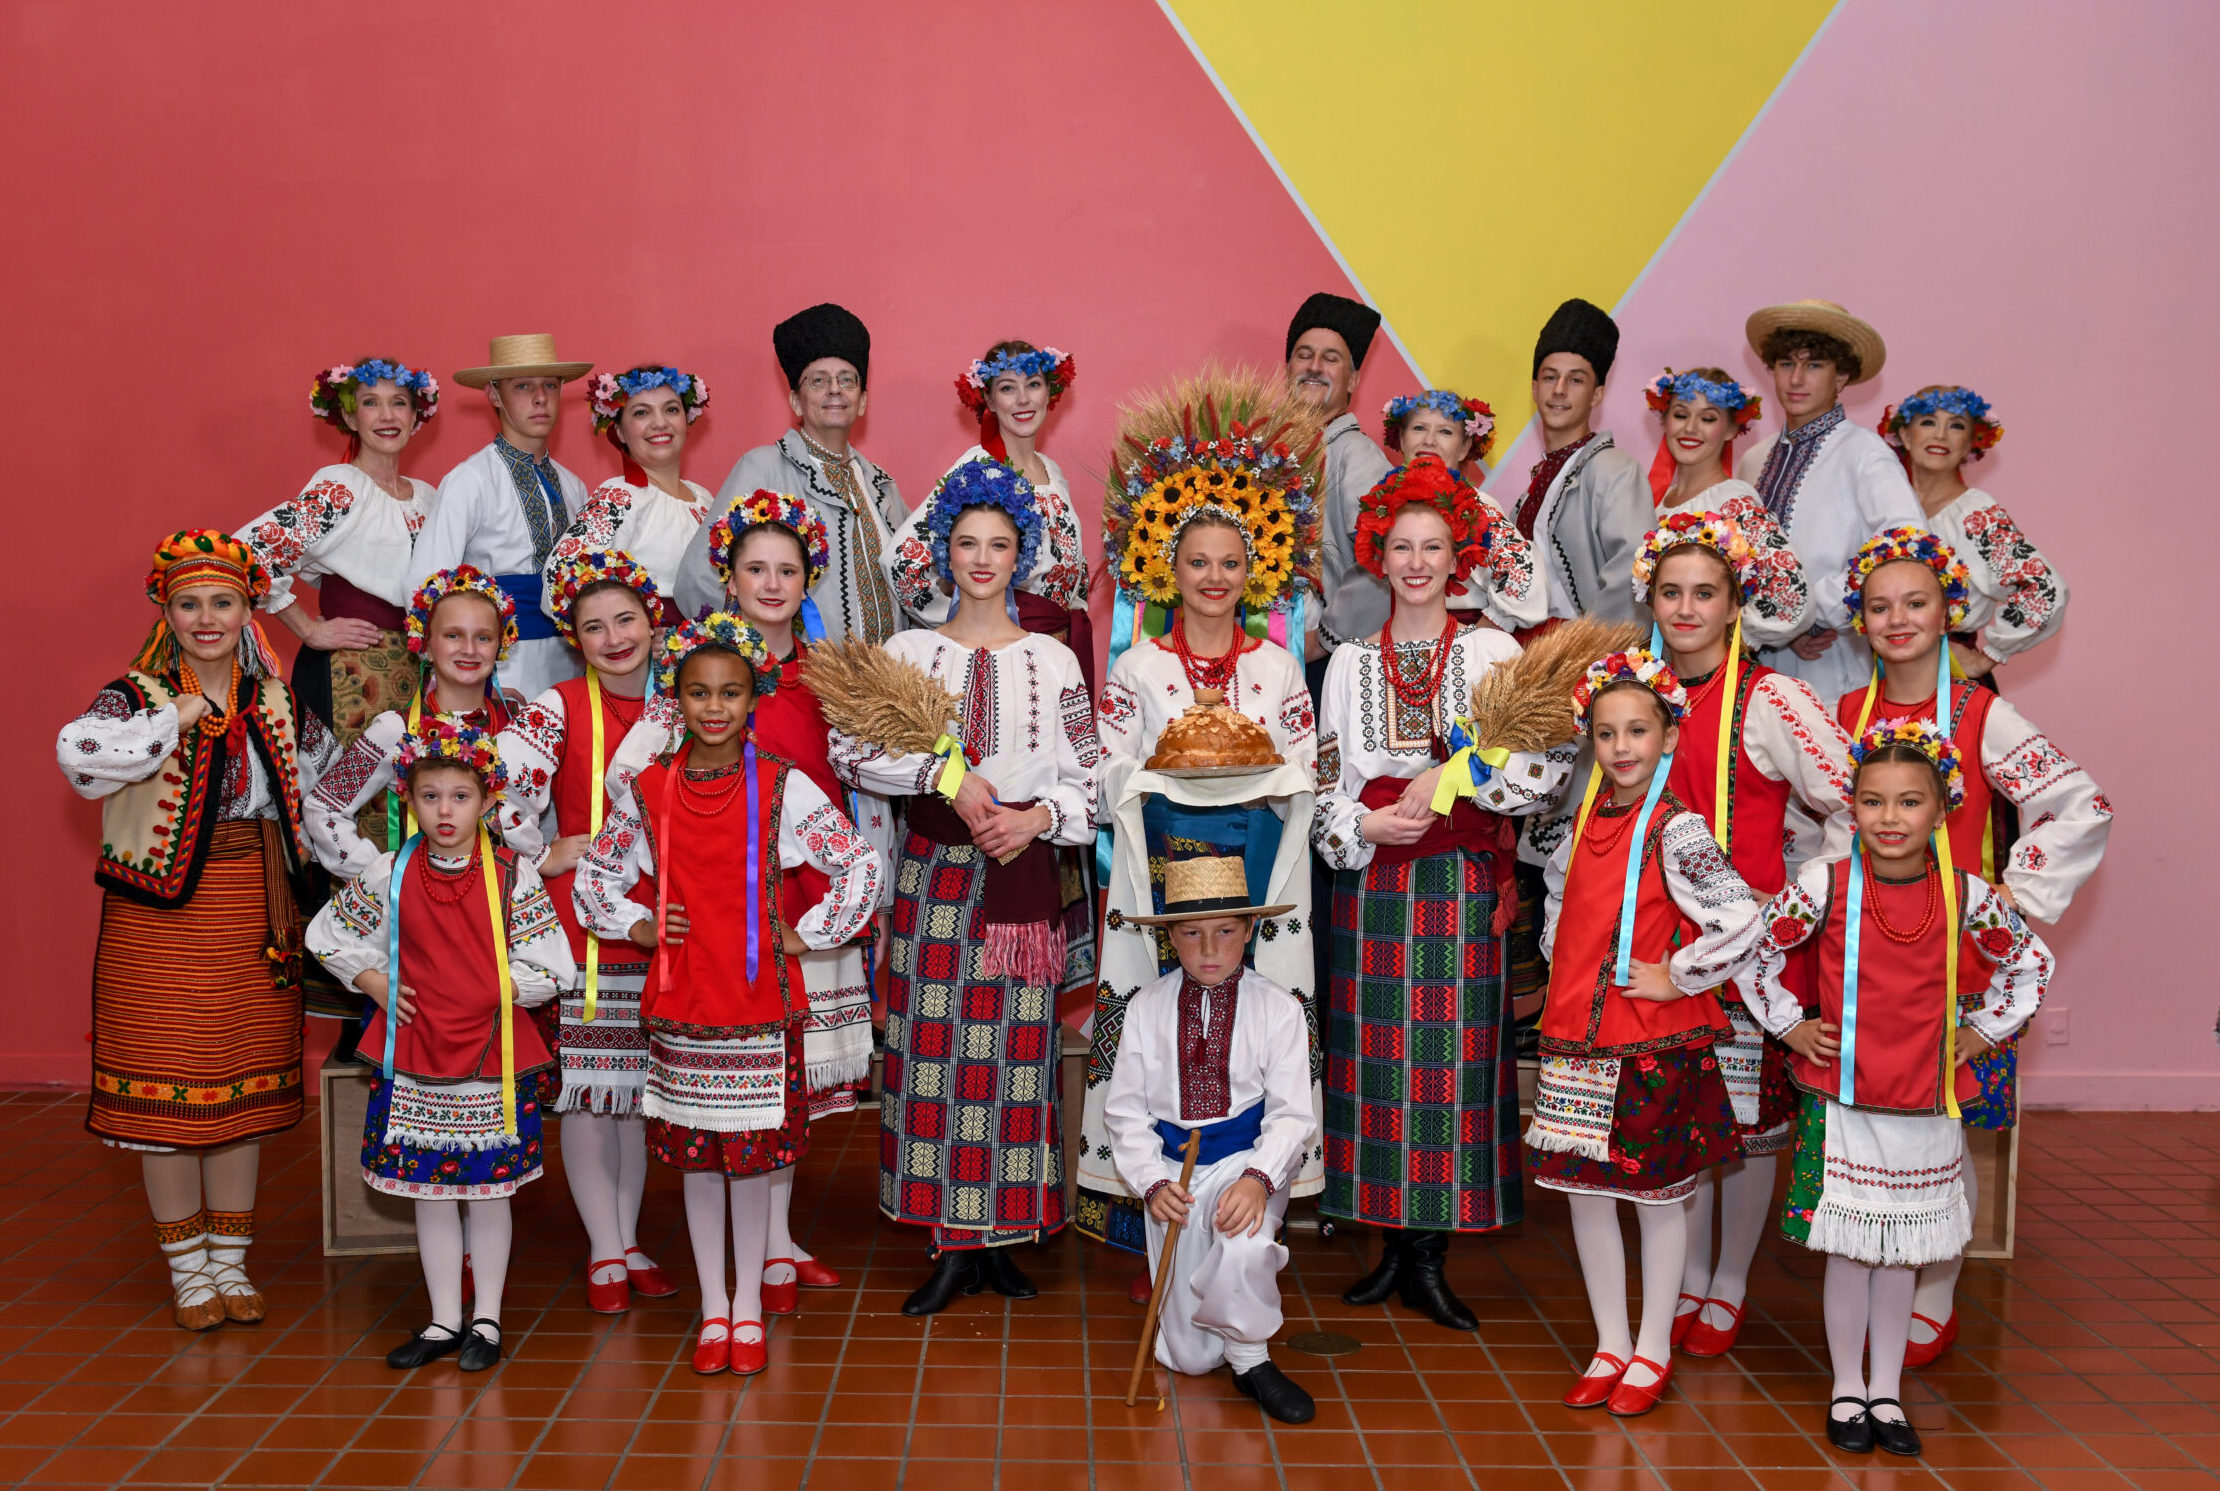 The Ukrainian Dancers of Miami pose for a photo in traditional costumes